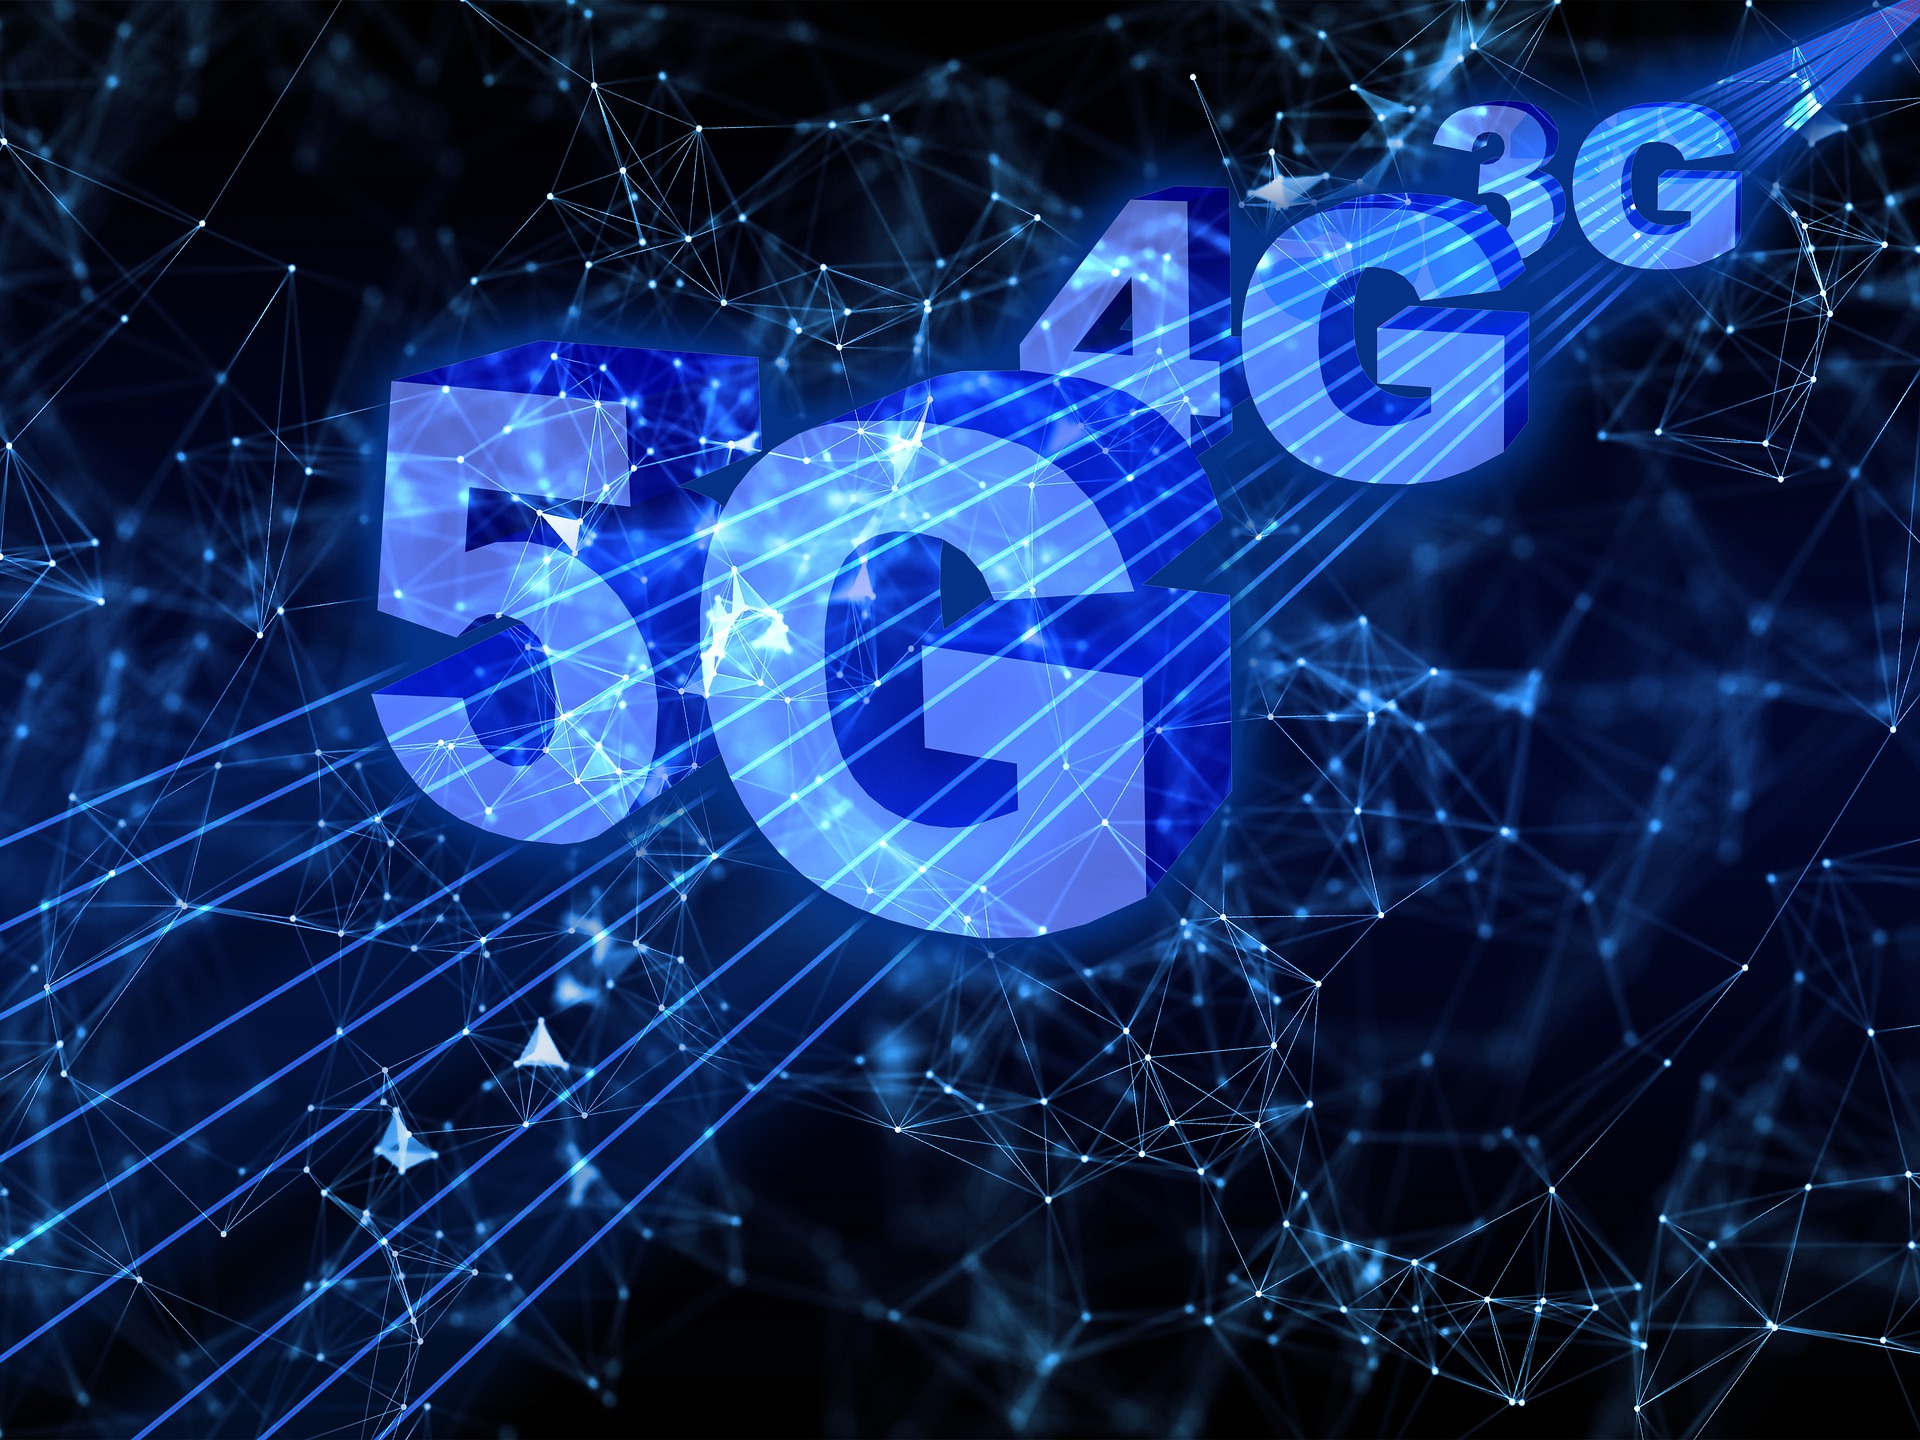 NTA determines 5G frequency